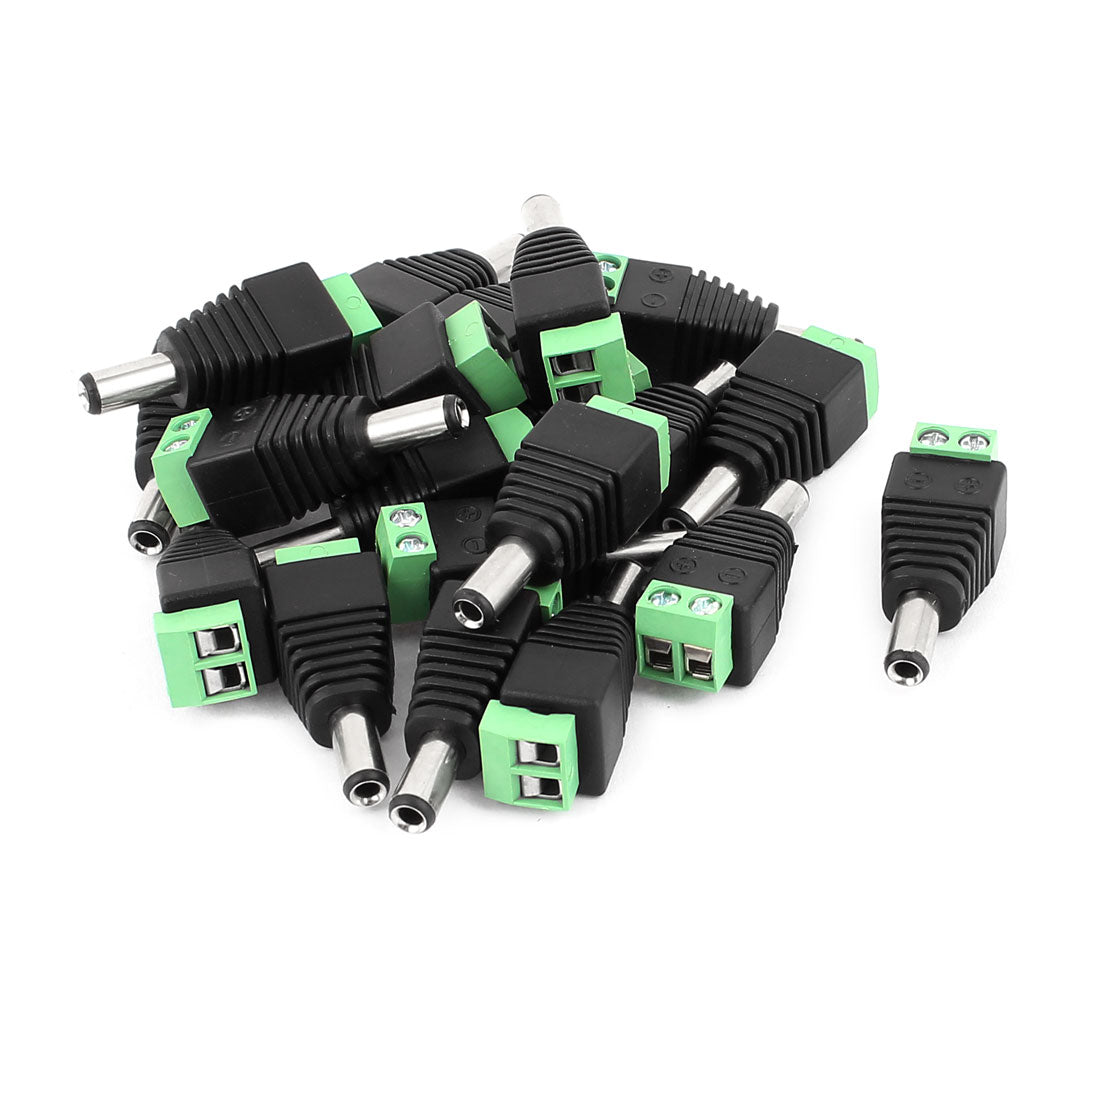 uxcell Uxcell 20 Pcs 5.5mm x 2.5mm Male DC Power Jack Terminal Connectors for CCTV Camera